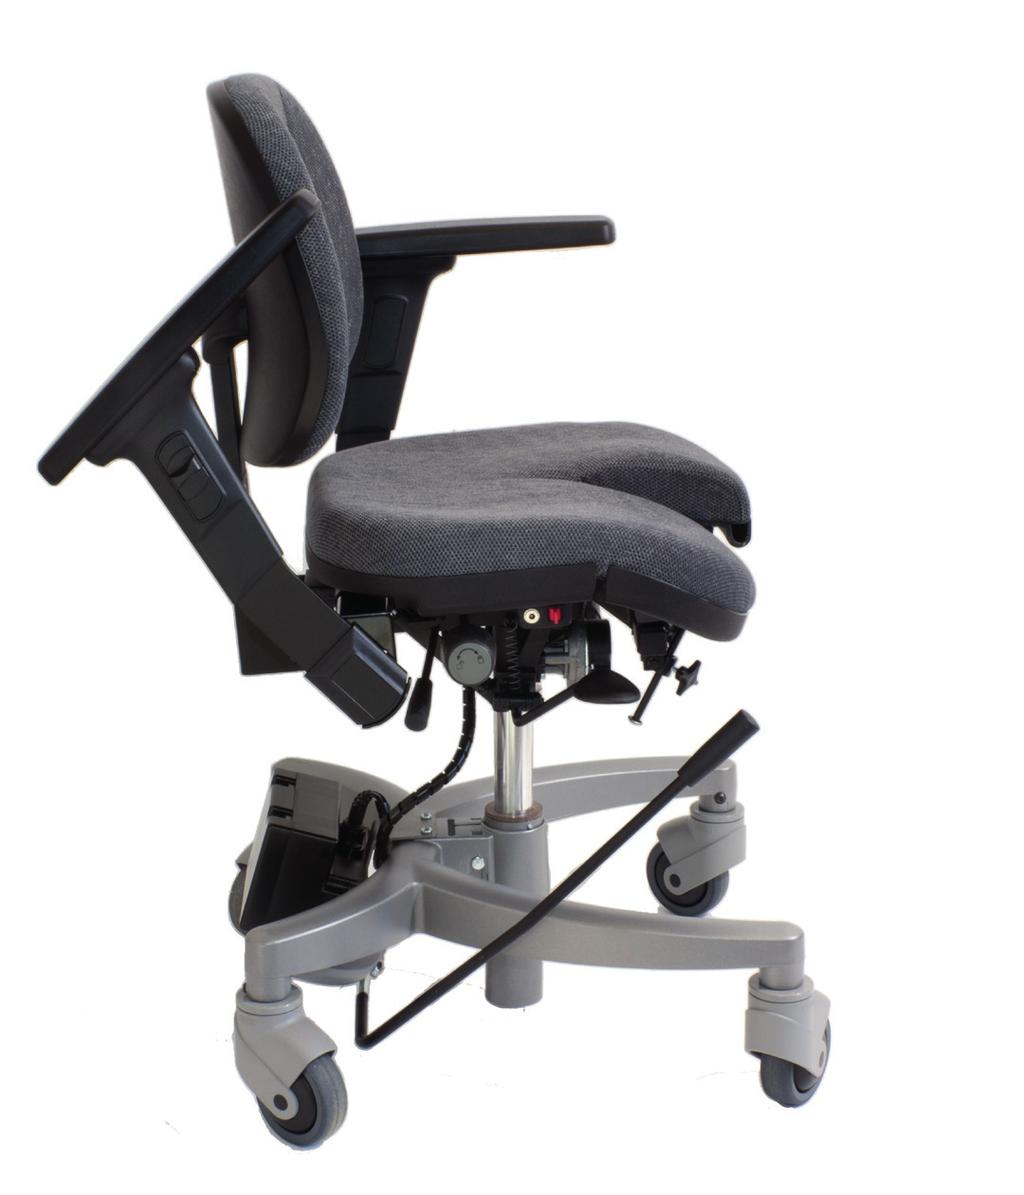 HEPRO G2 COXIT OG HEPRO E2 COXIT Work chairs with coxit-seat Hepro G2 Coxit Hepro E2 Coxit 5 The Coxit seats have seat flaps, which can be regulated